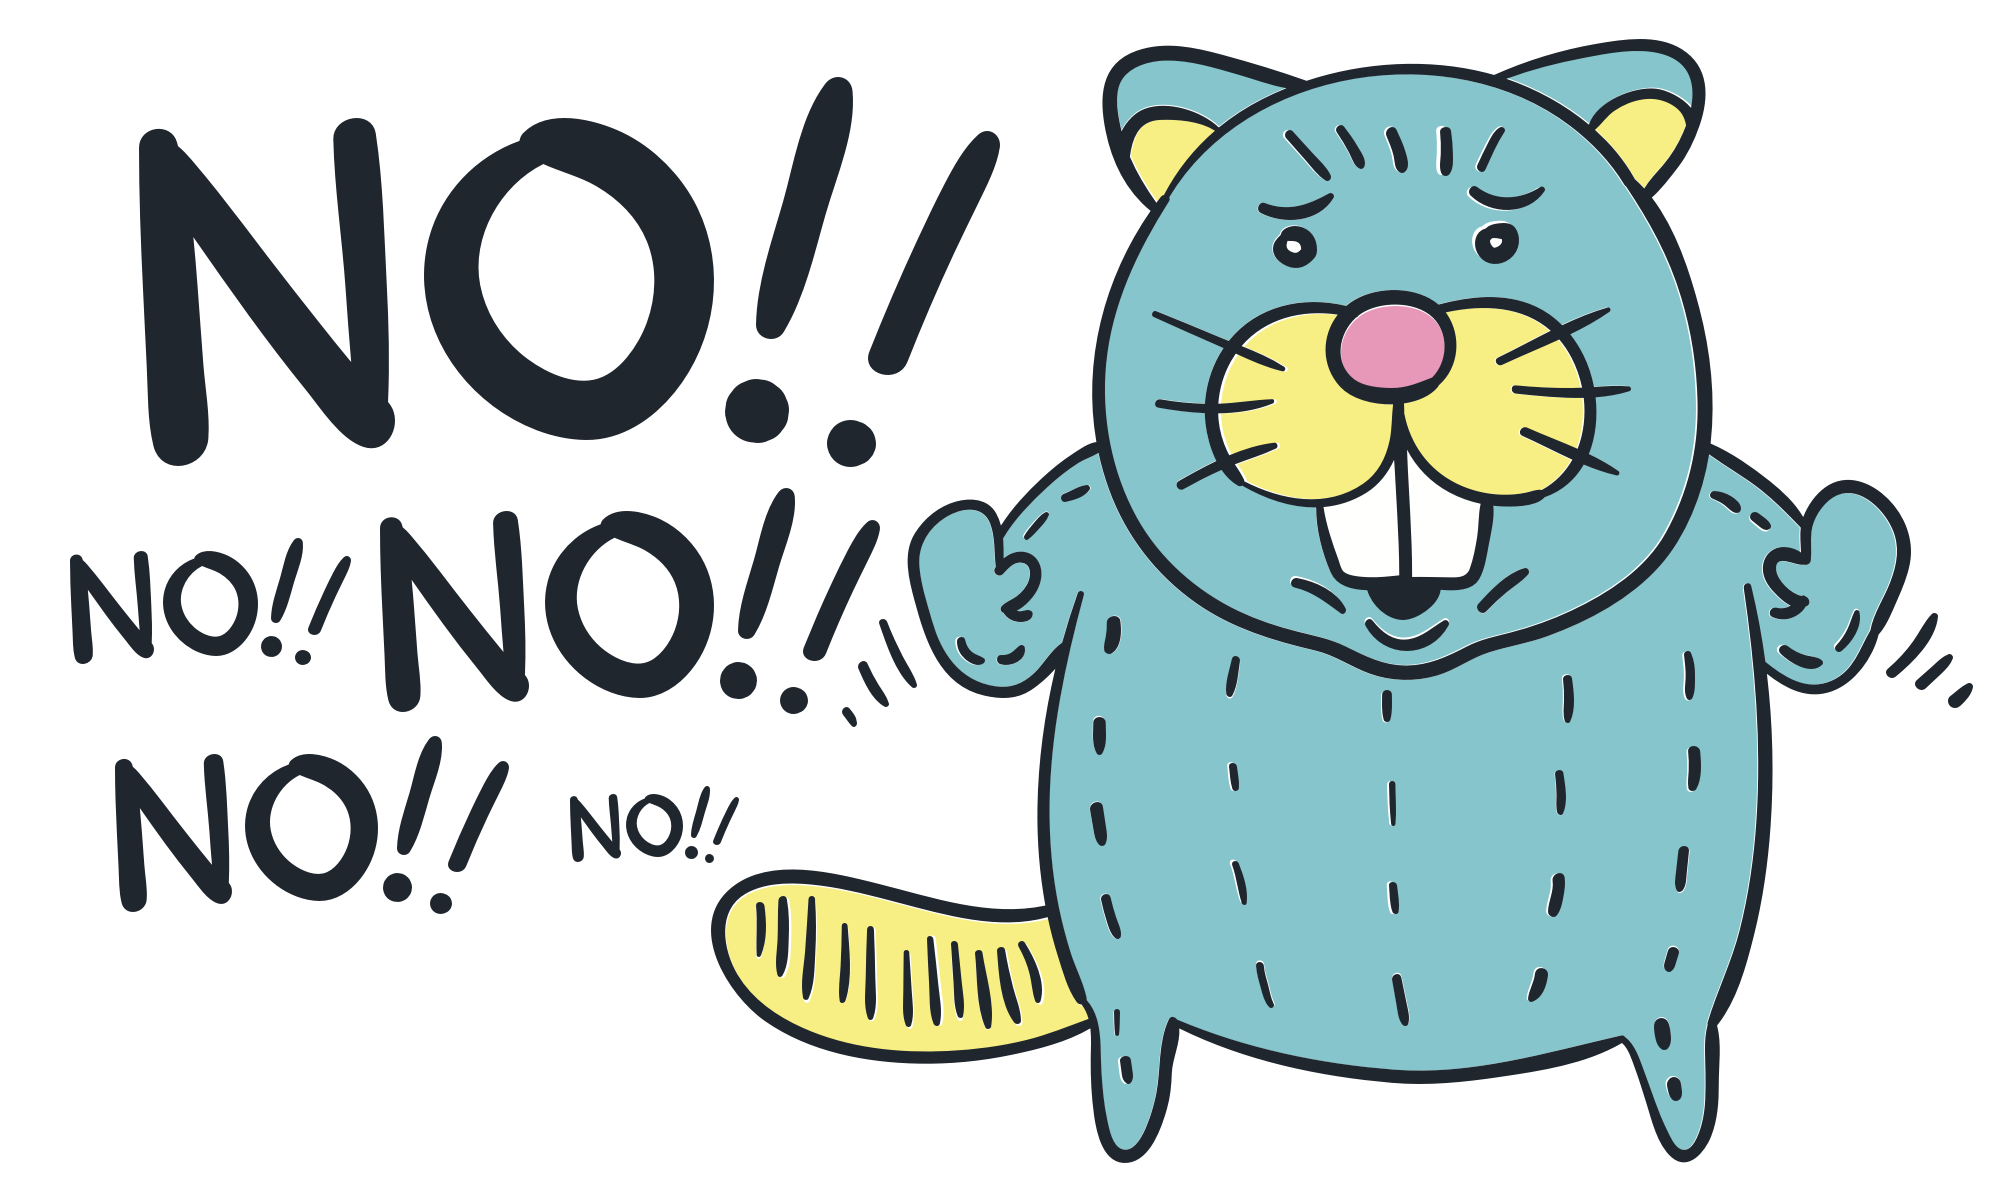 A cartoon beaver saying "NO!!" over and over.